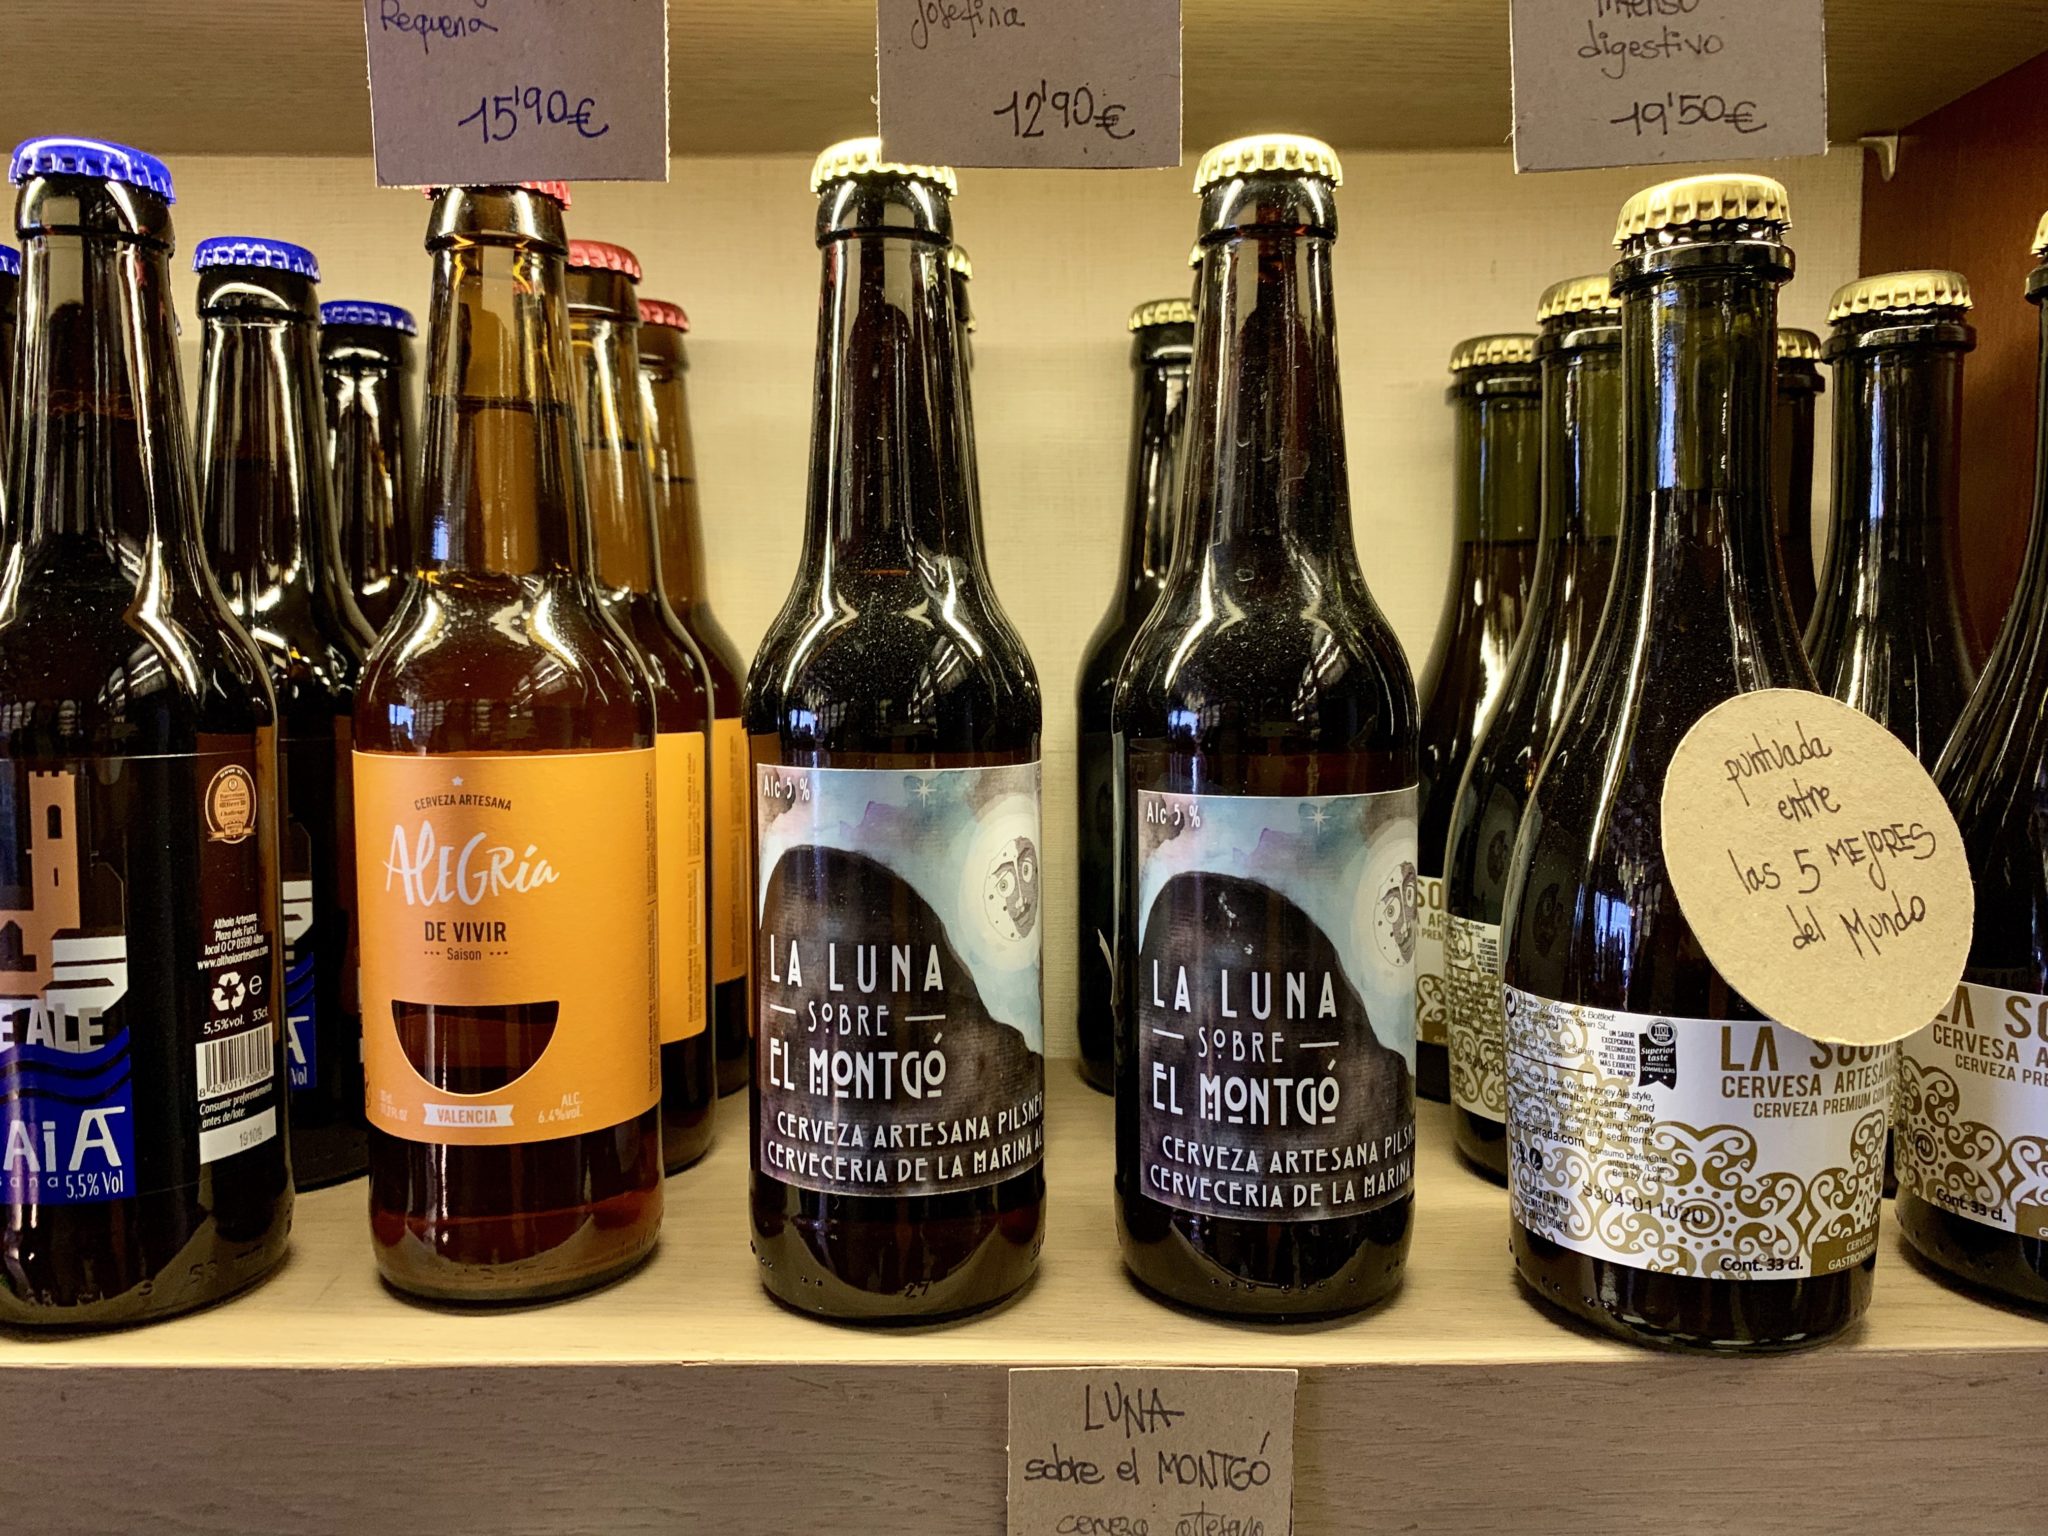 Local craft beers are also steadily making a mark in the city. Pictured here are bottles found in the store Original CV, which carries authentic Valencian products